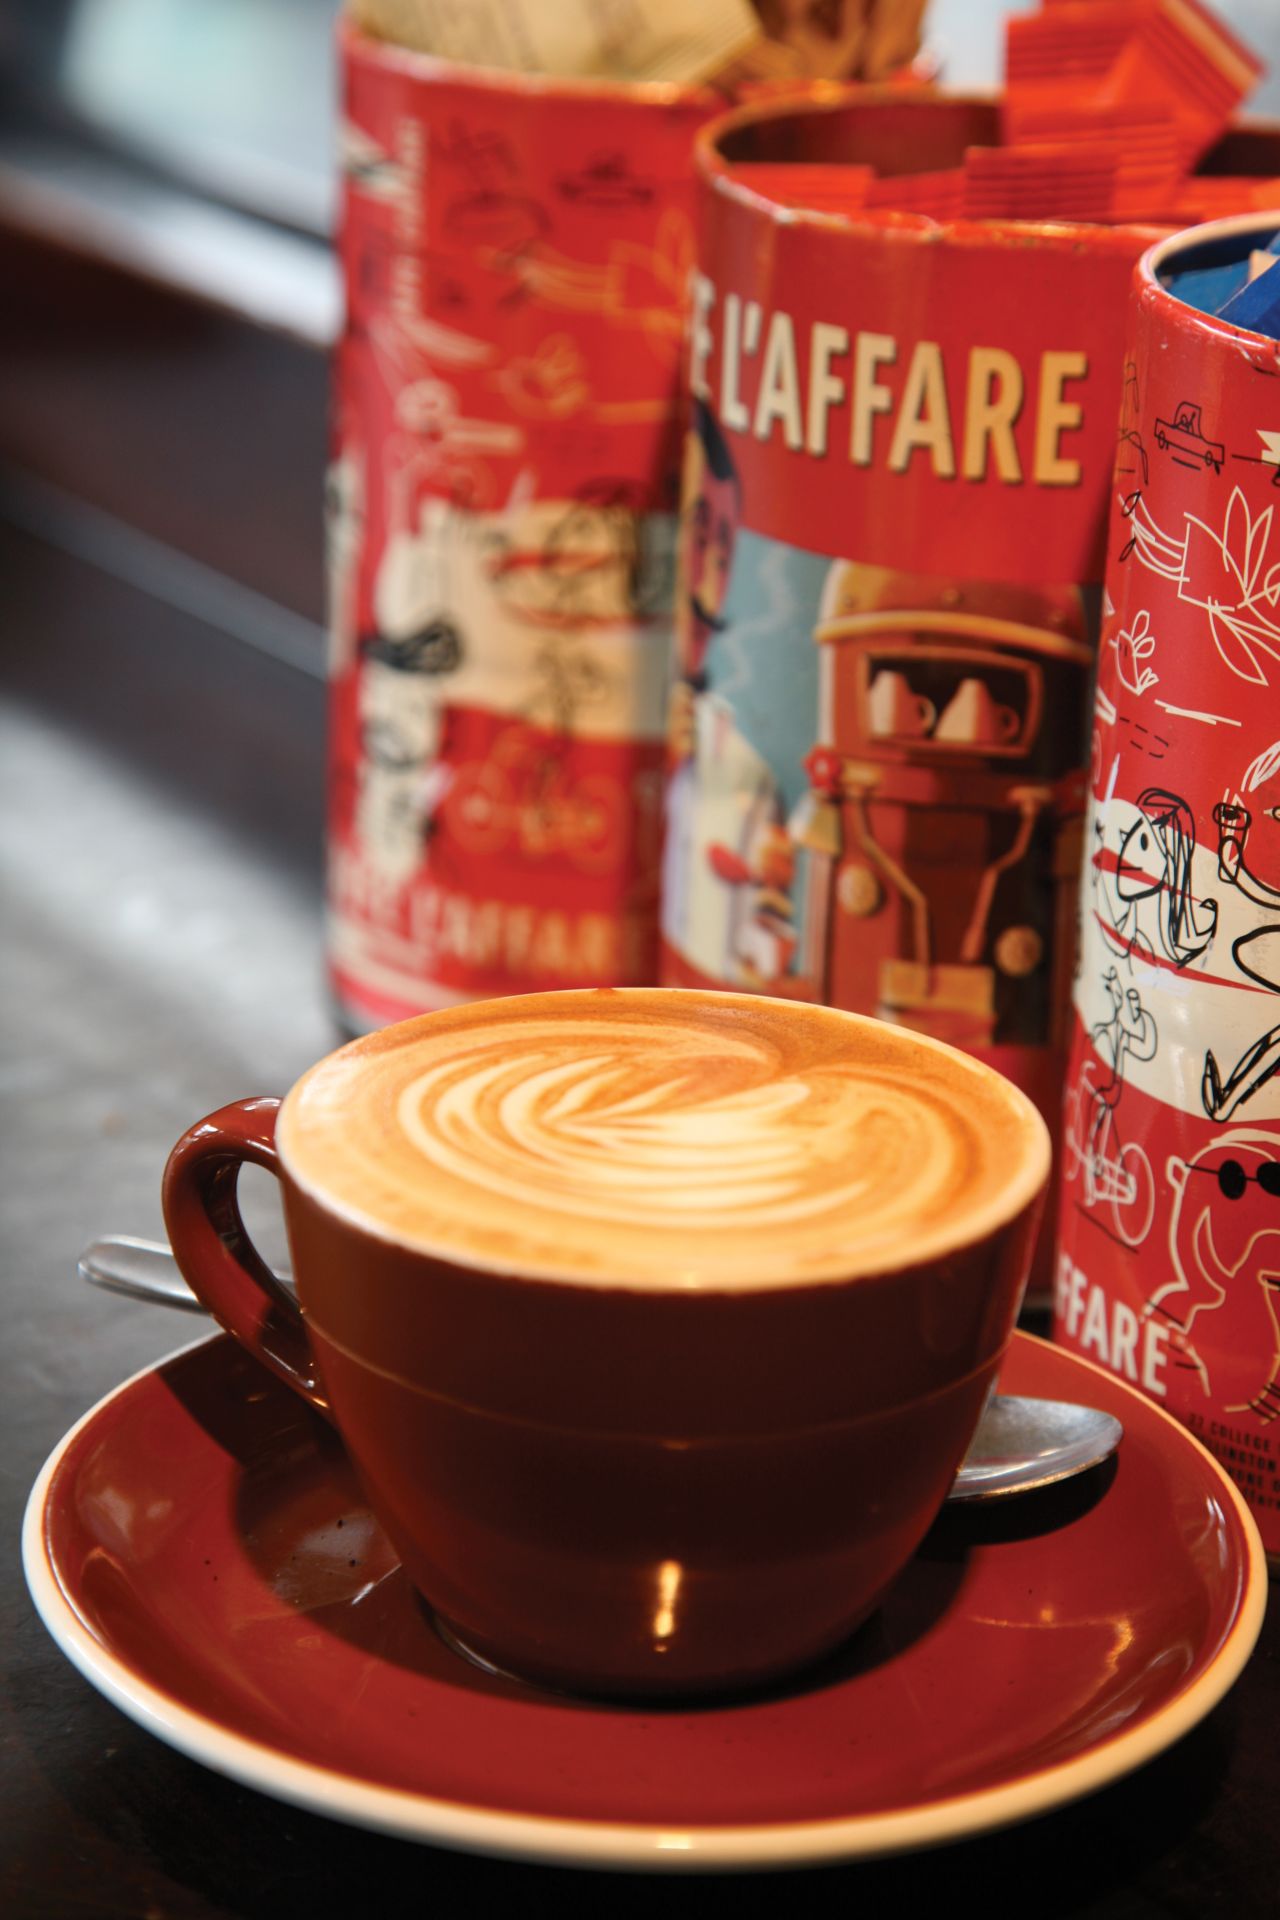 According to Wellington-ites, the ubiquitous flat white was perfected in New Zealand's capital. The drink has since become the Kiwi's unofficial national beverage. 